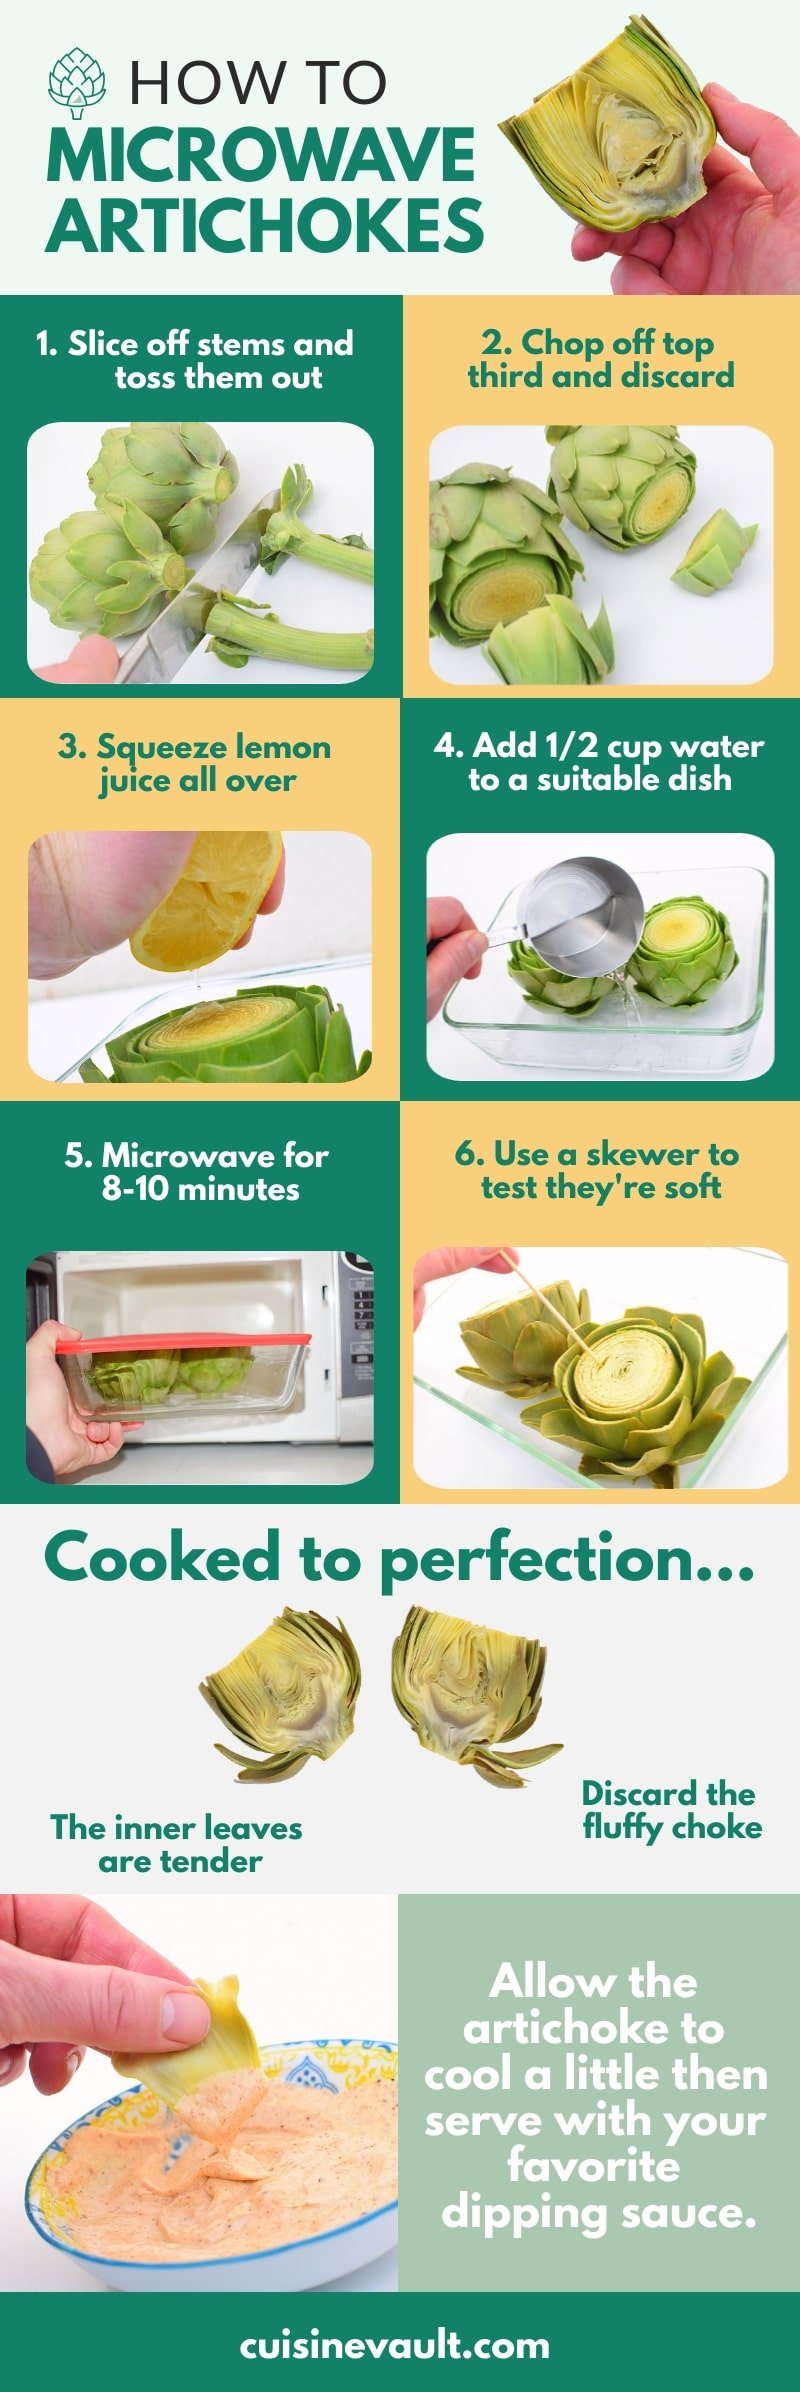 How to microwave artichokes infographic